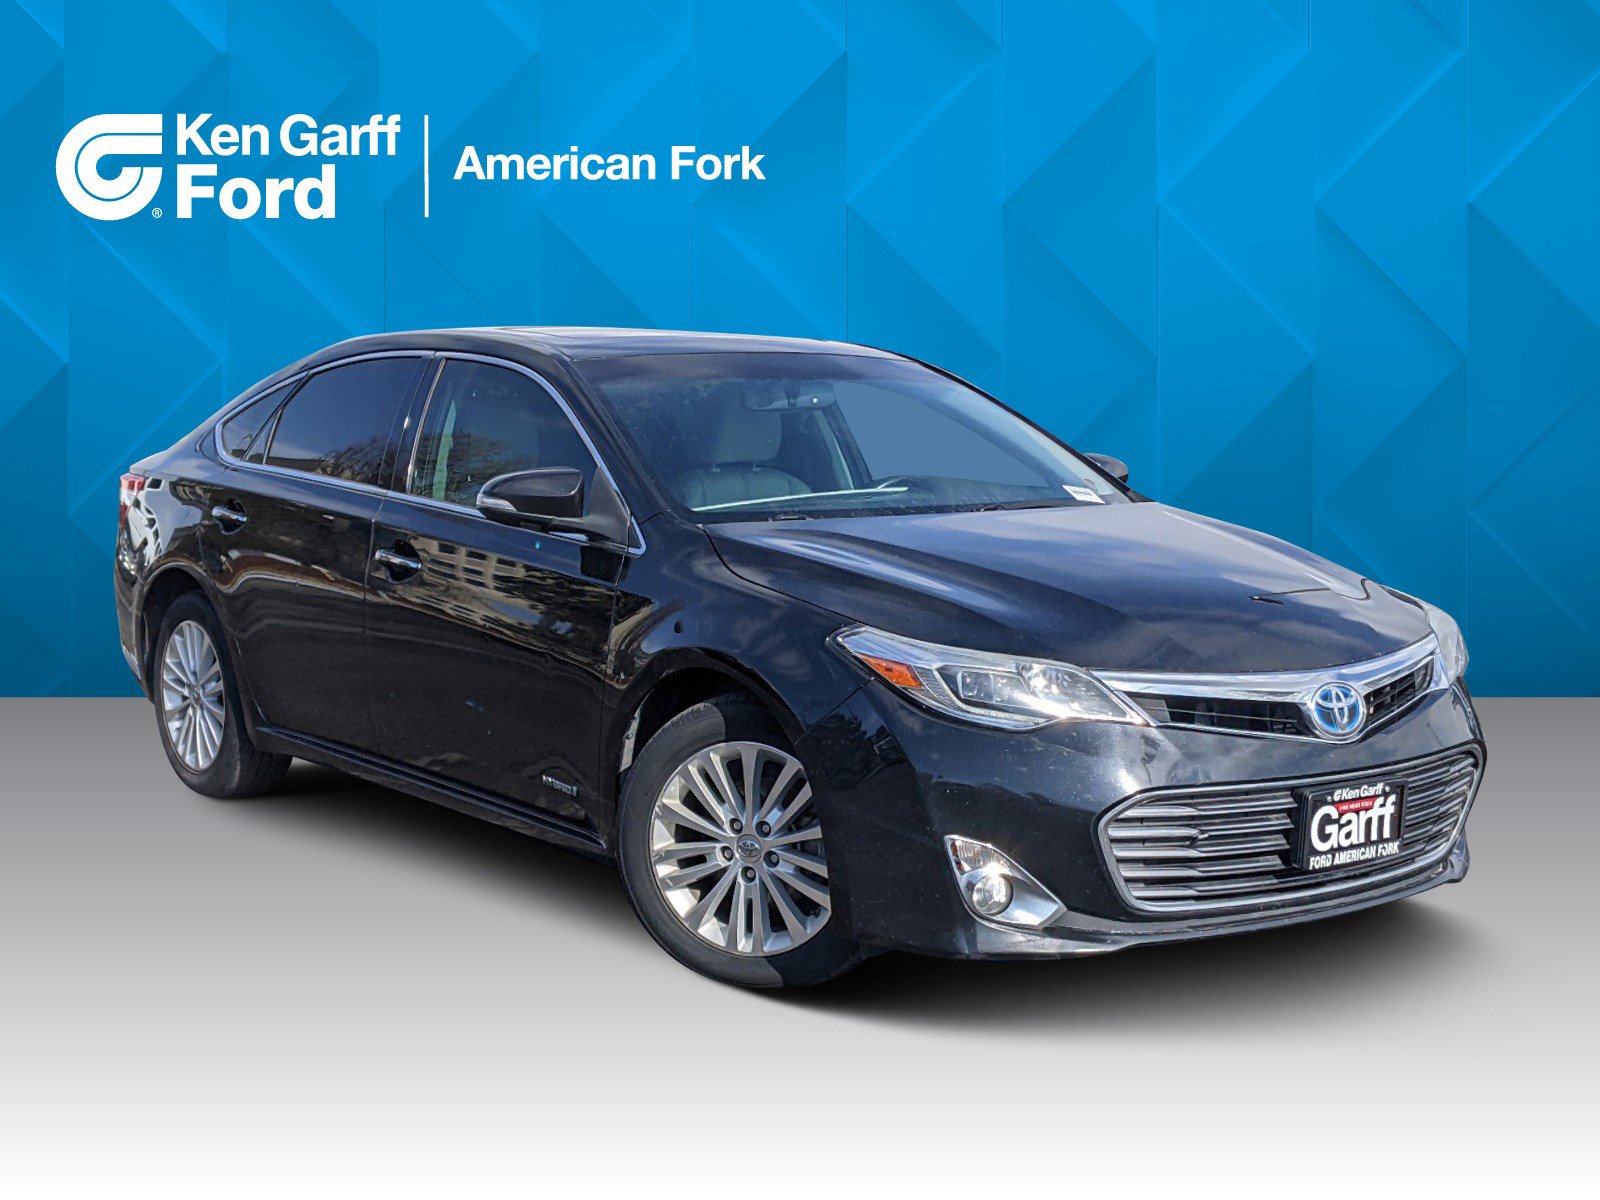 Pre-Owned 2013 Toyota Avalon Hybrid XLE Touring 4dr Car in American Fork  #1FX1416A | Ken Garff Chevrolet